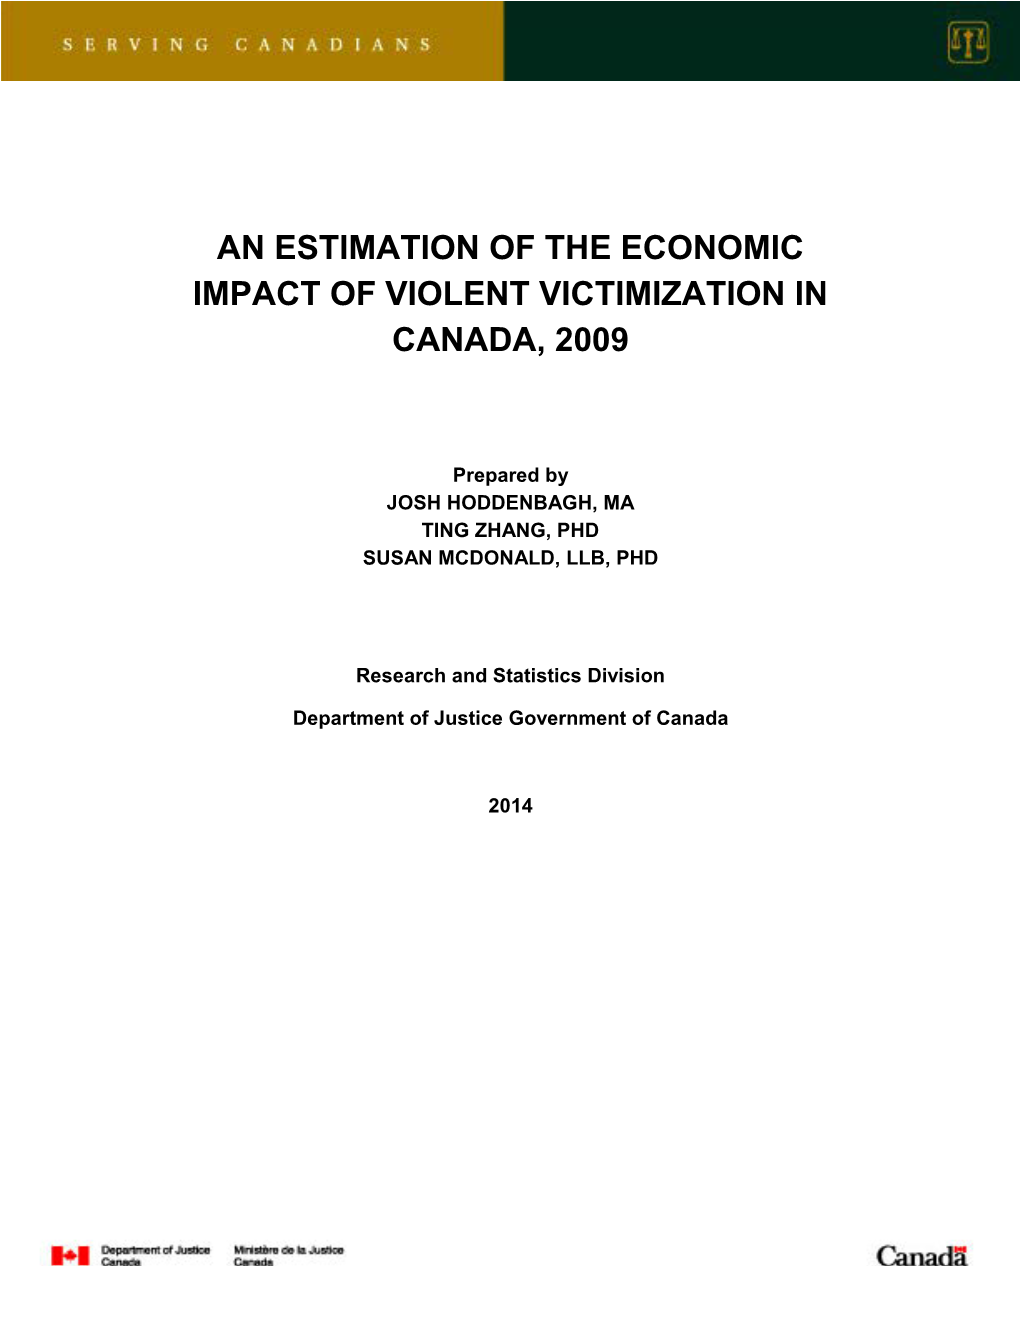 An Estimation of the Economic Impact of Violent Victimization in Canada, 2009